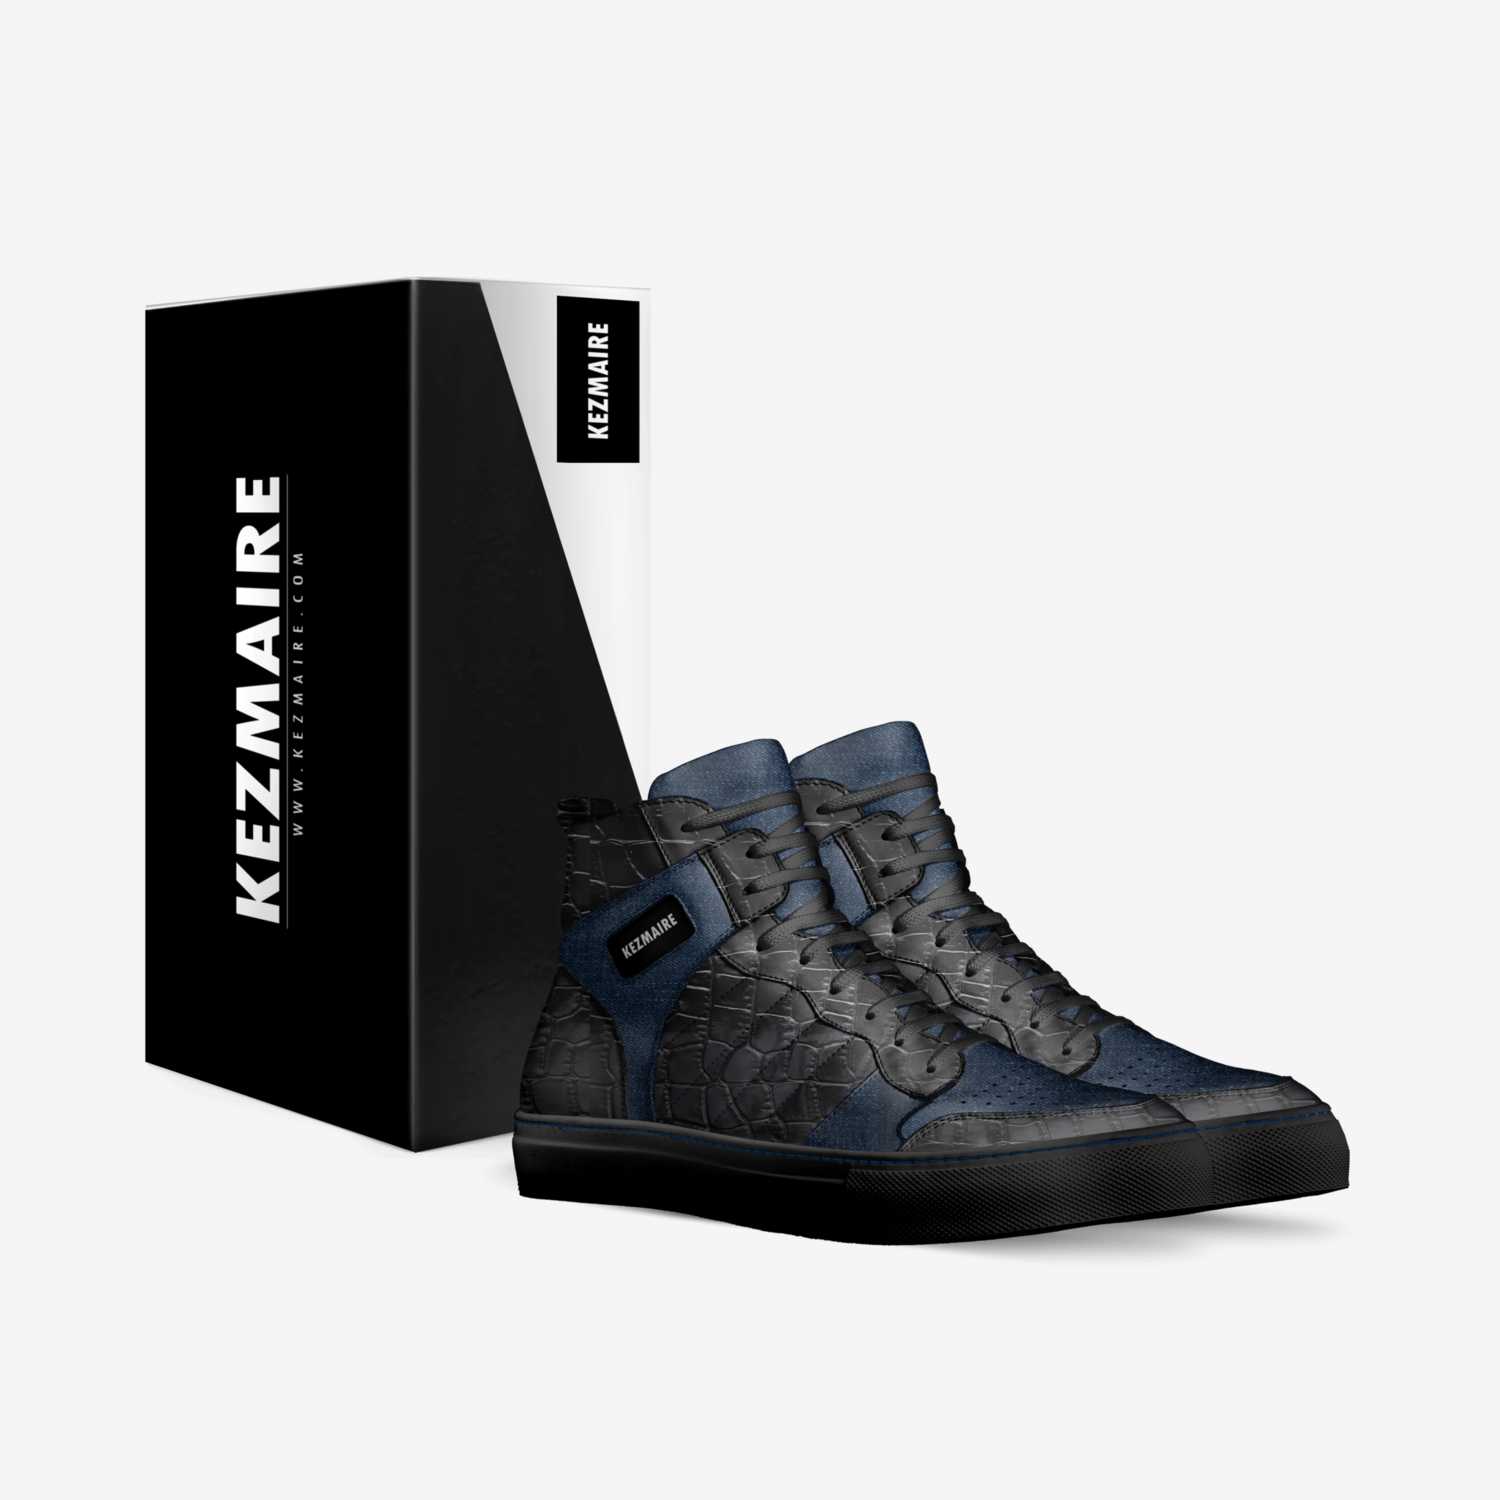 Roxi Denim R5 custom made in Italy shoes by Kezmaire Brand | Box view